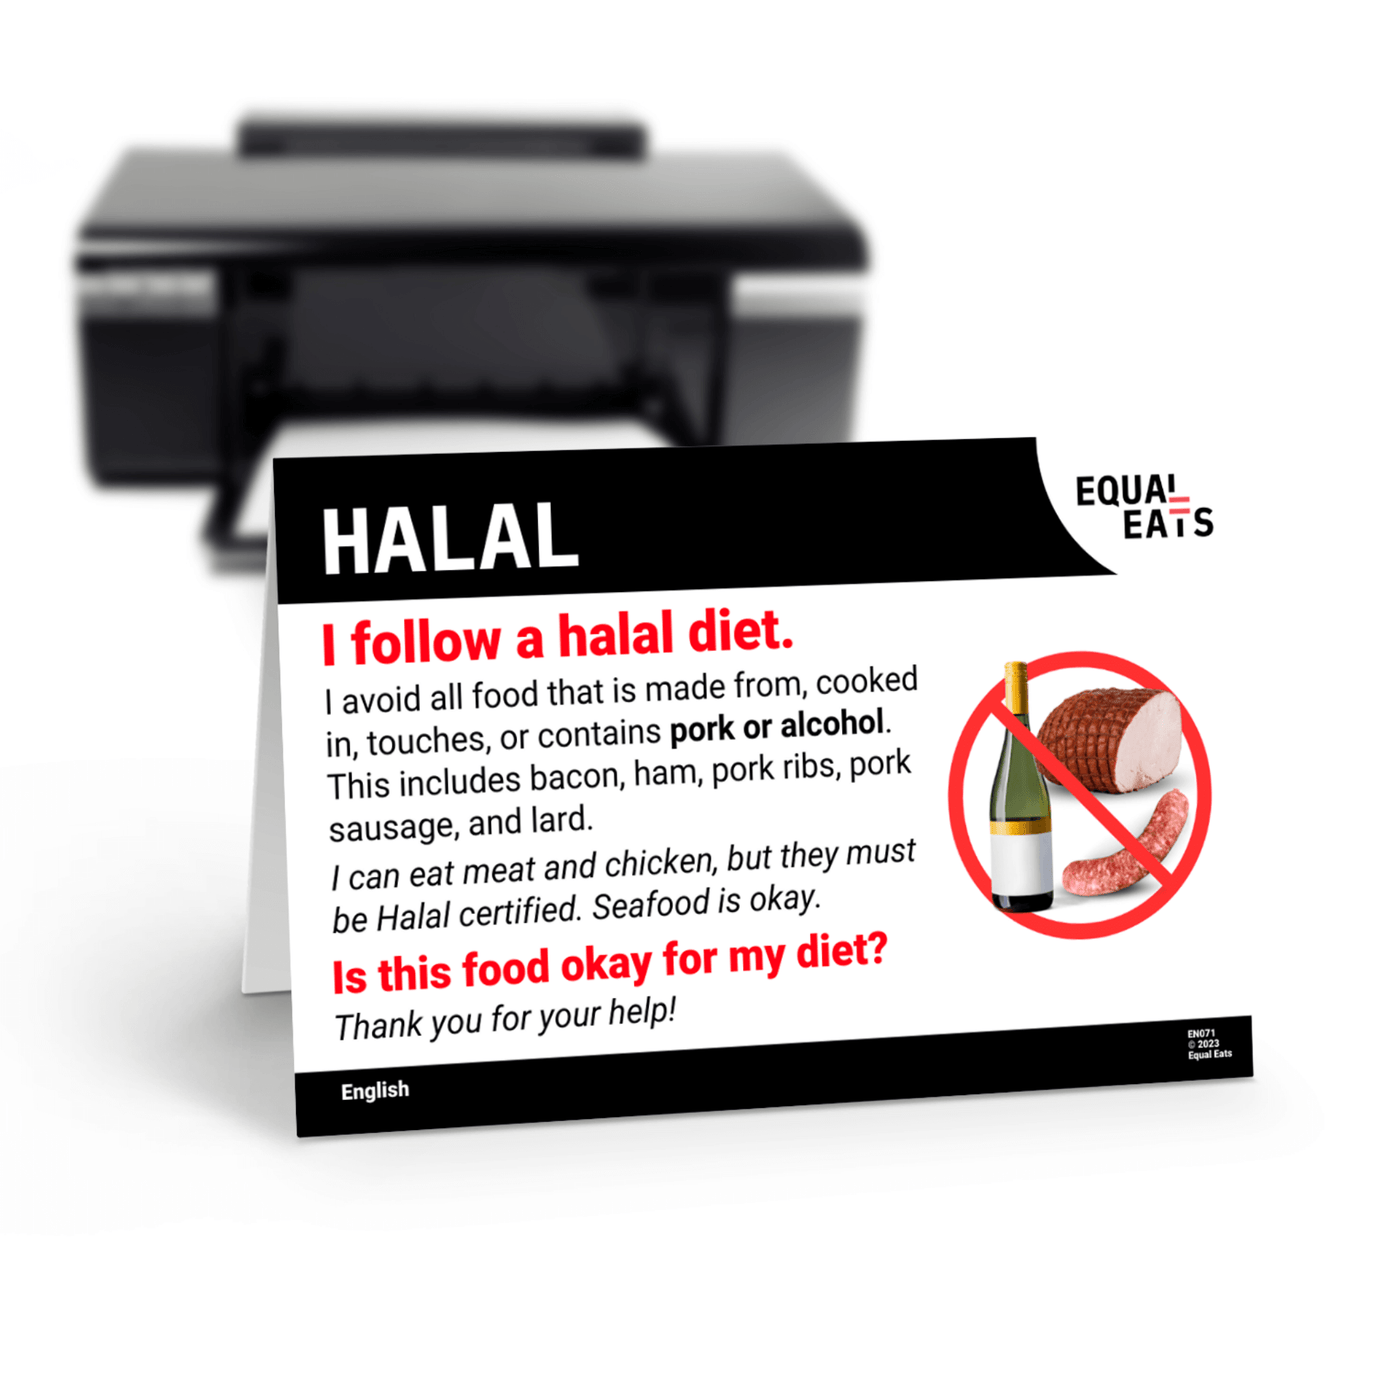 Halal Diet Card by Equal Eats